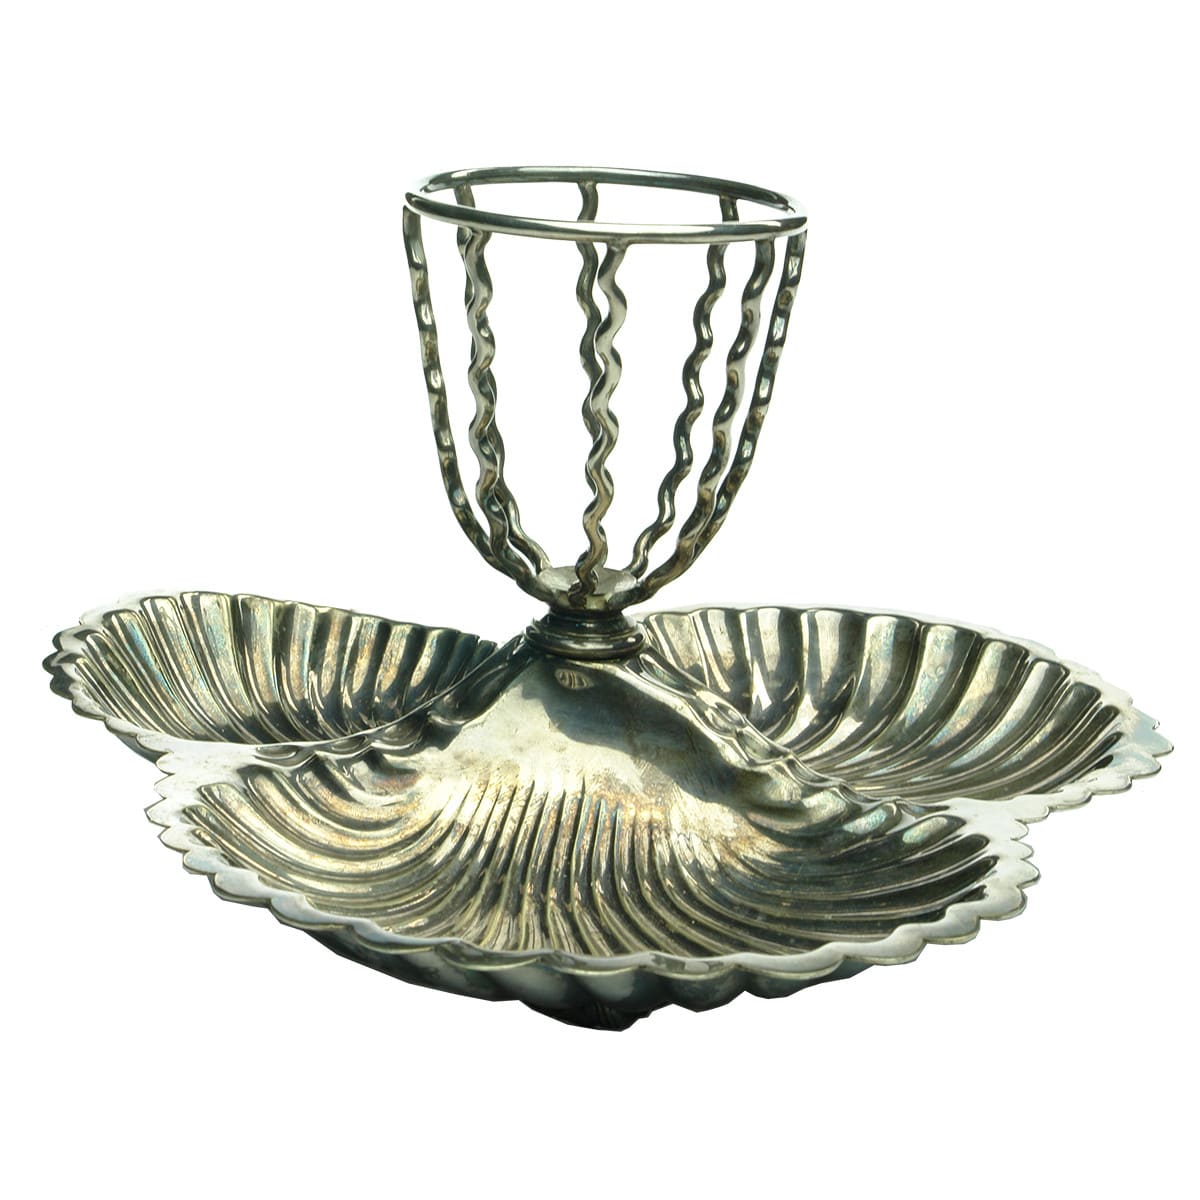 Metalware. Torpedo Holder on Scallop Shell Tray with Shell Feet.